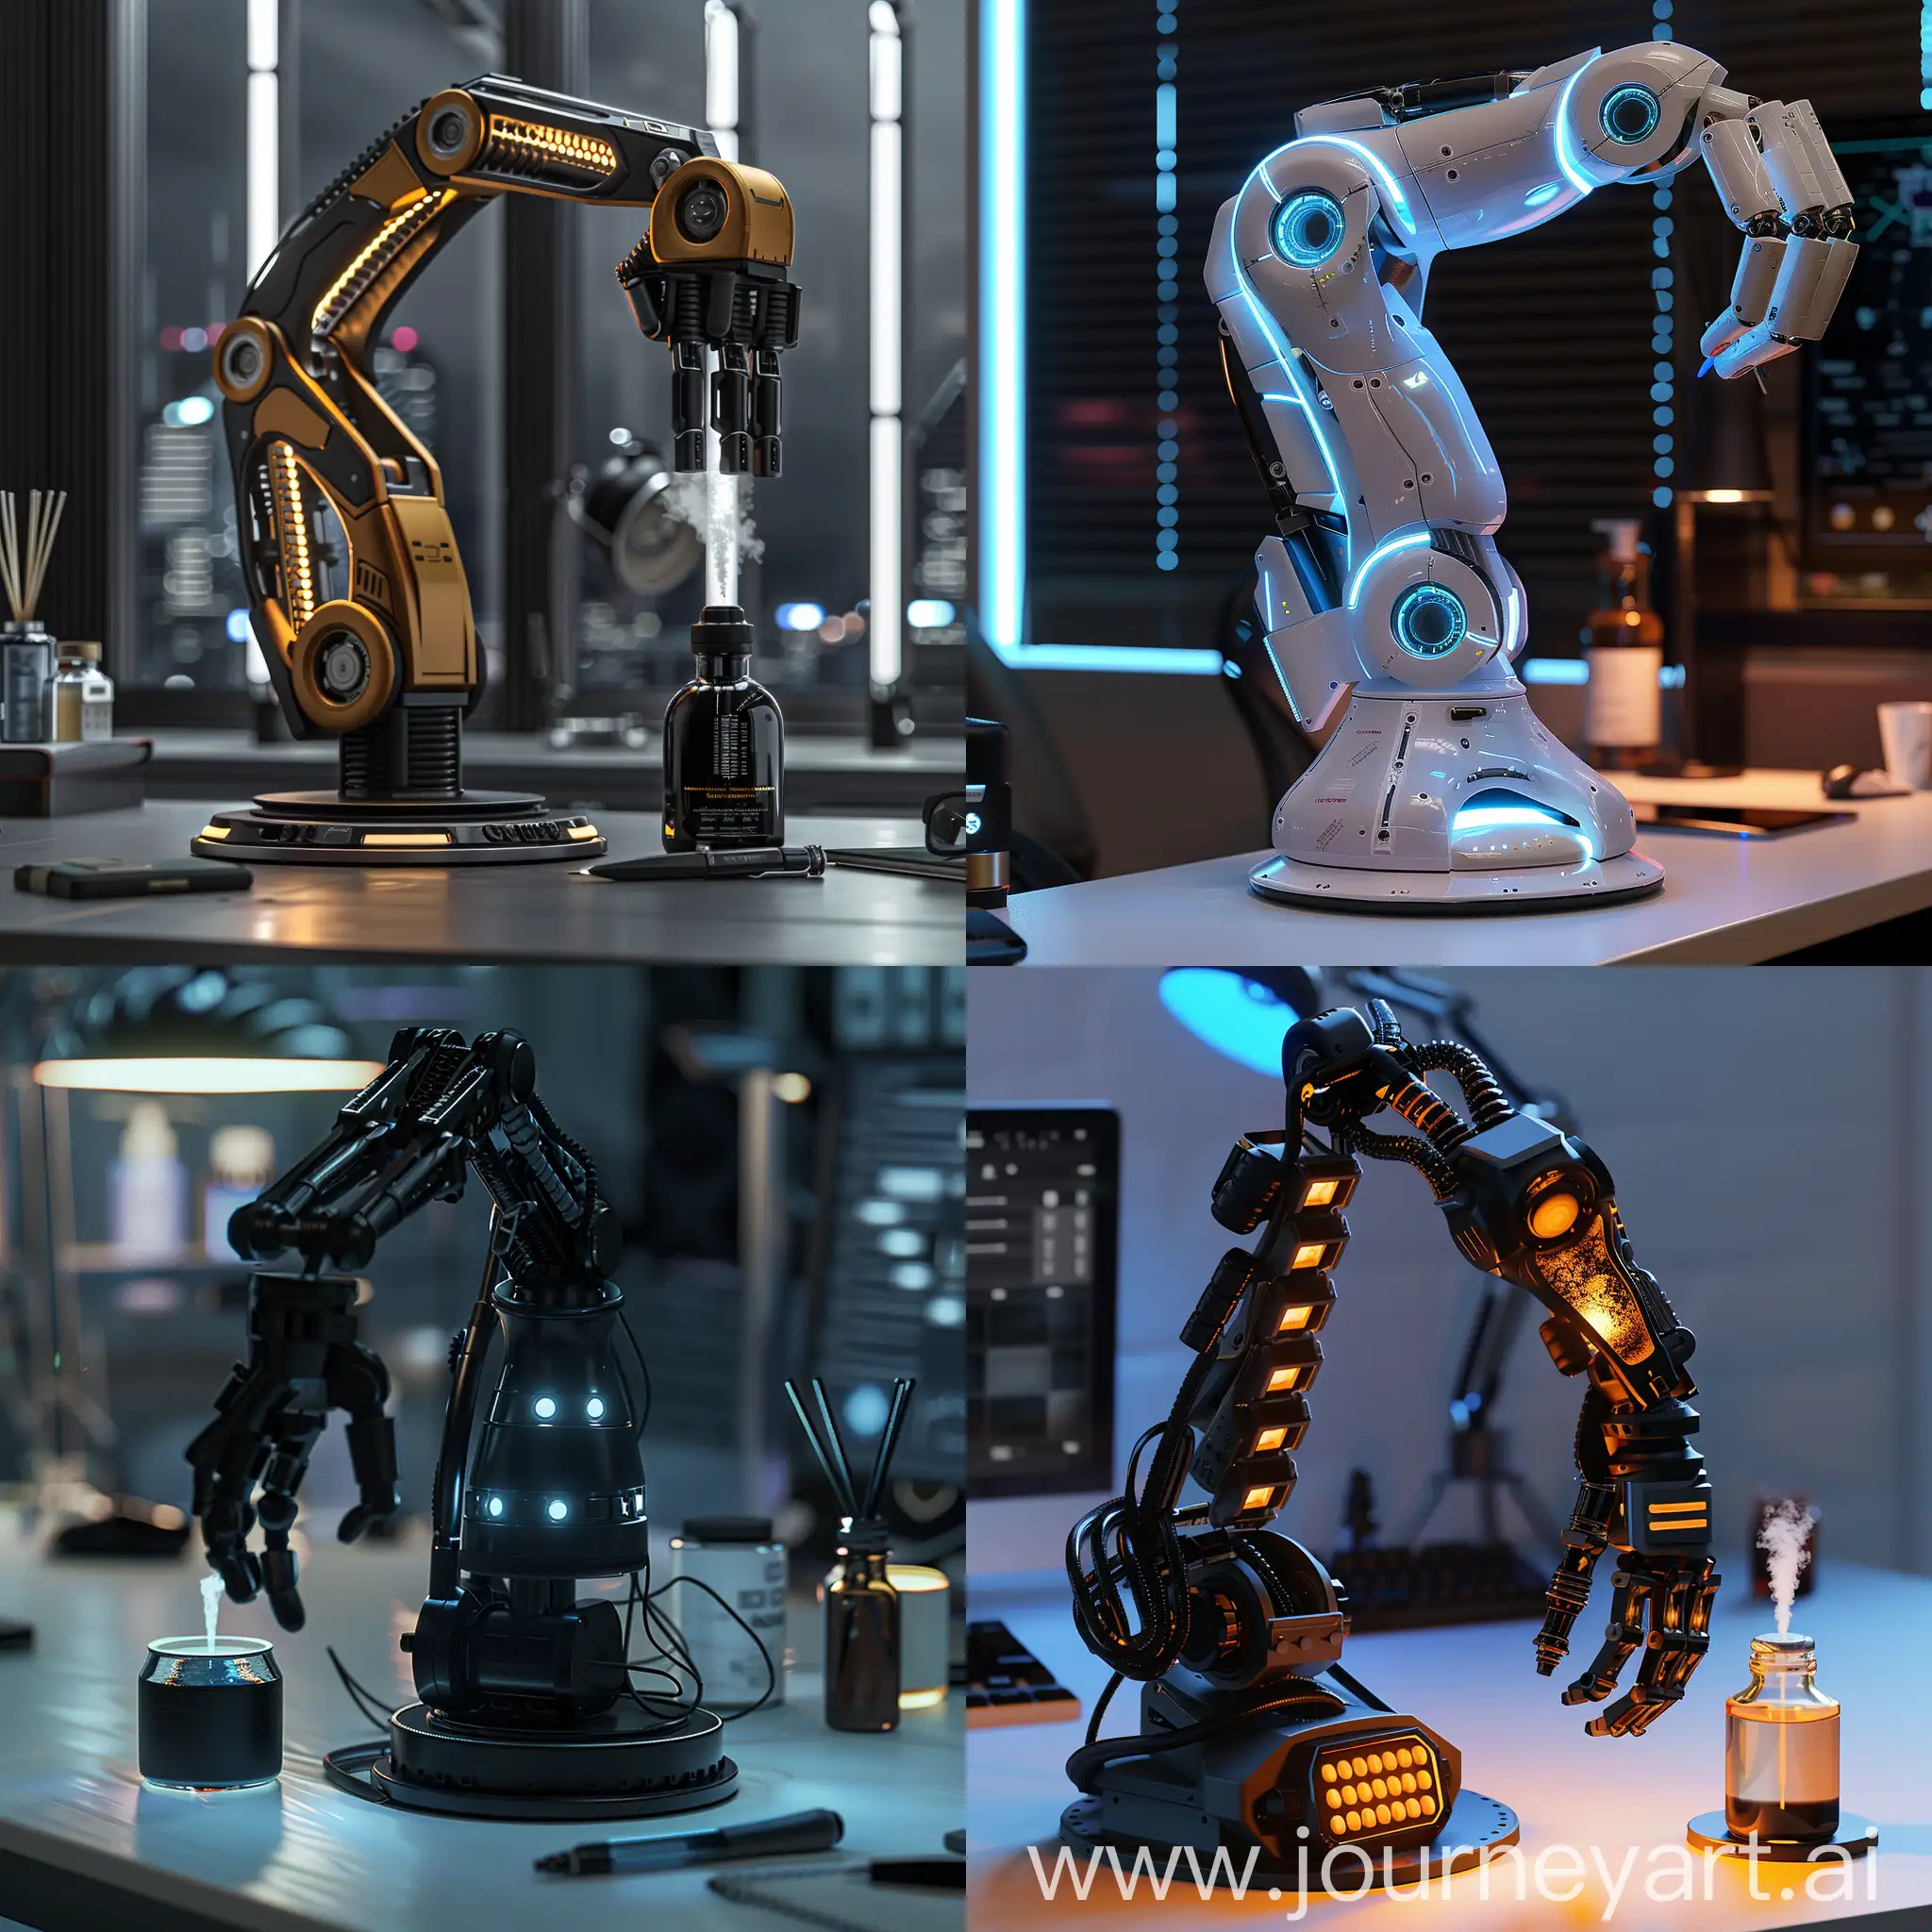 Create product design for my business, create a industrial robotic arm theme,desk light and aroma diffuser, it should be realistic, futuristic,simple, creative innovative design, it should be scifi,cyberpunk,